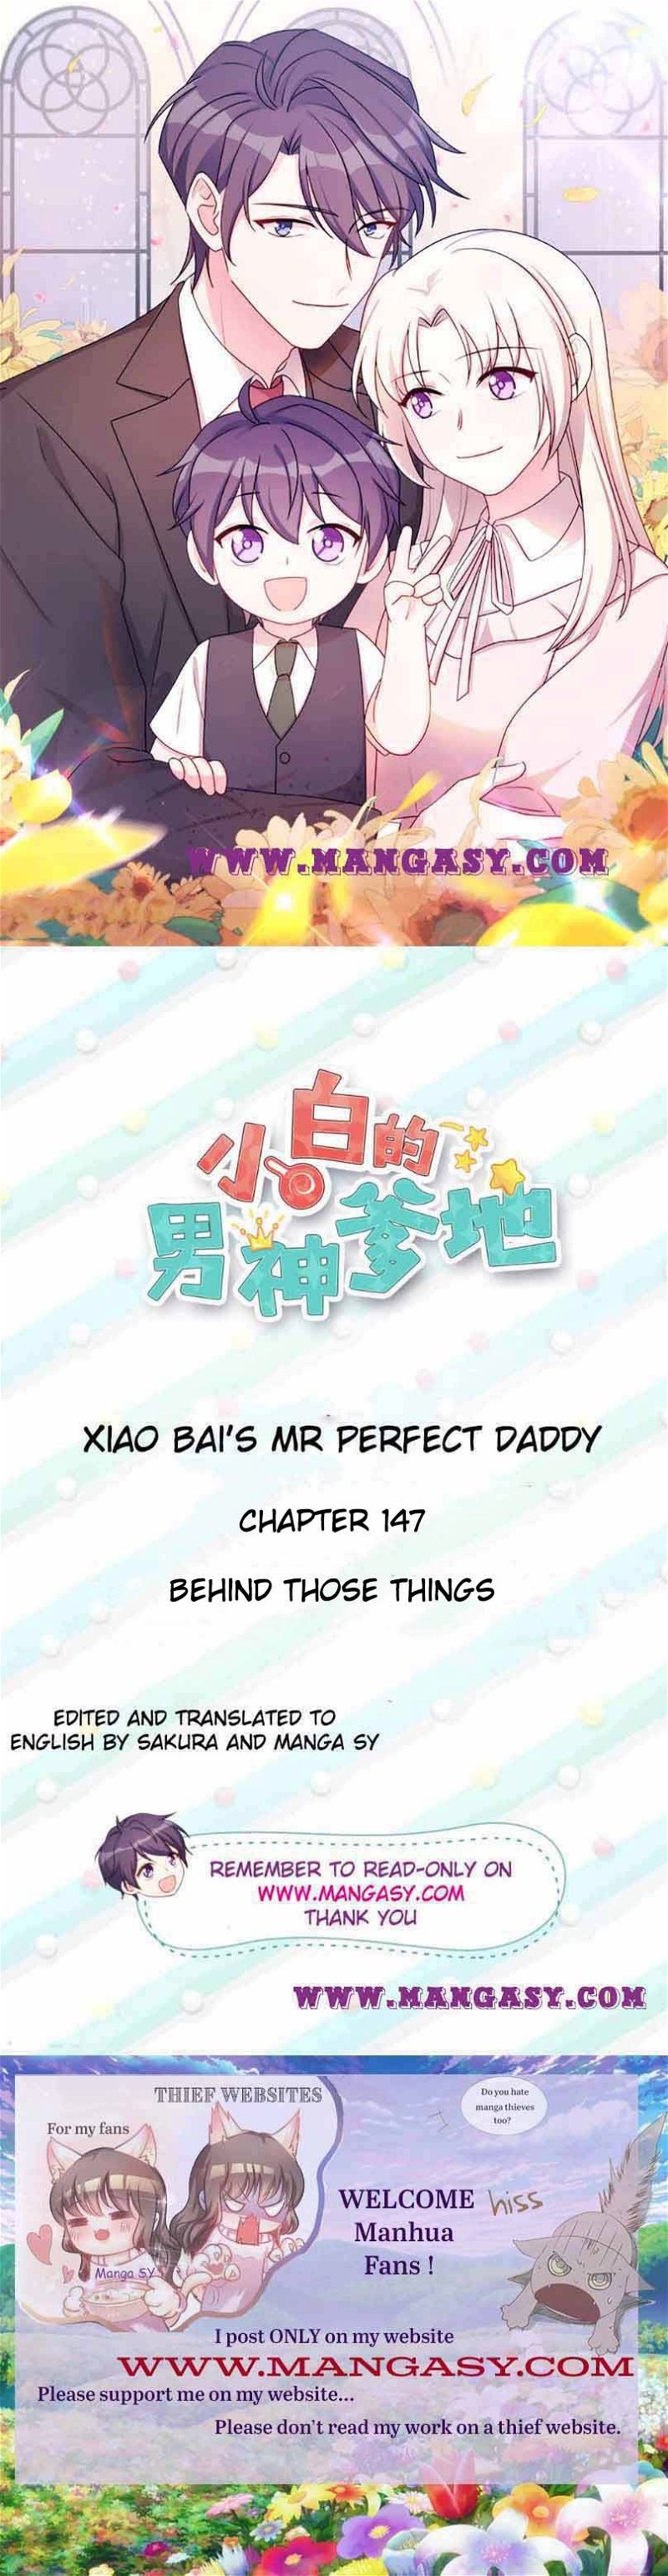 Xiao Bai’s father is a wonderful person Chapter 147 - Page 0